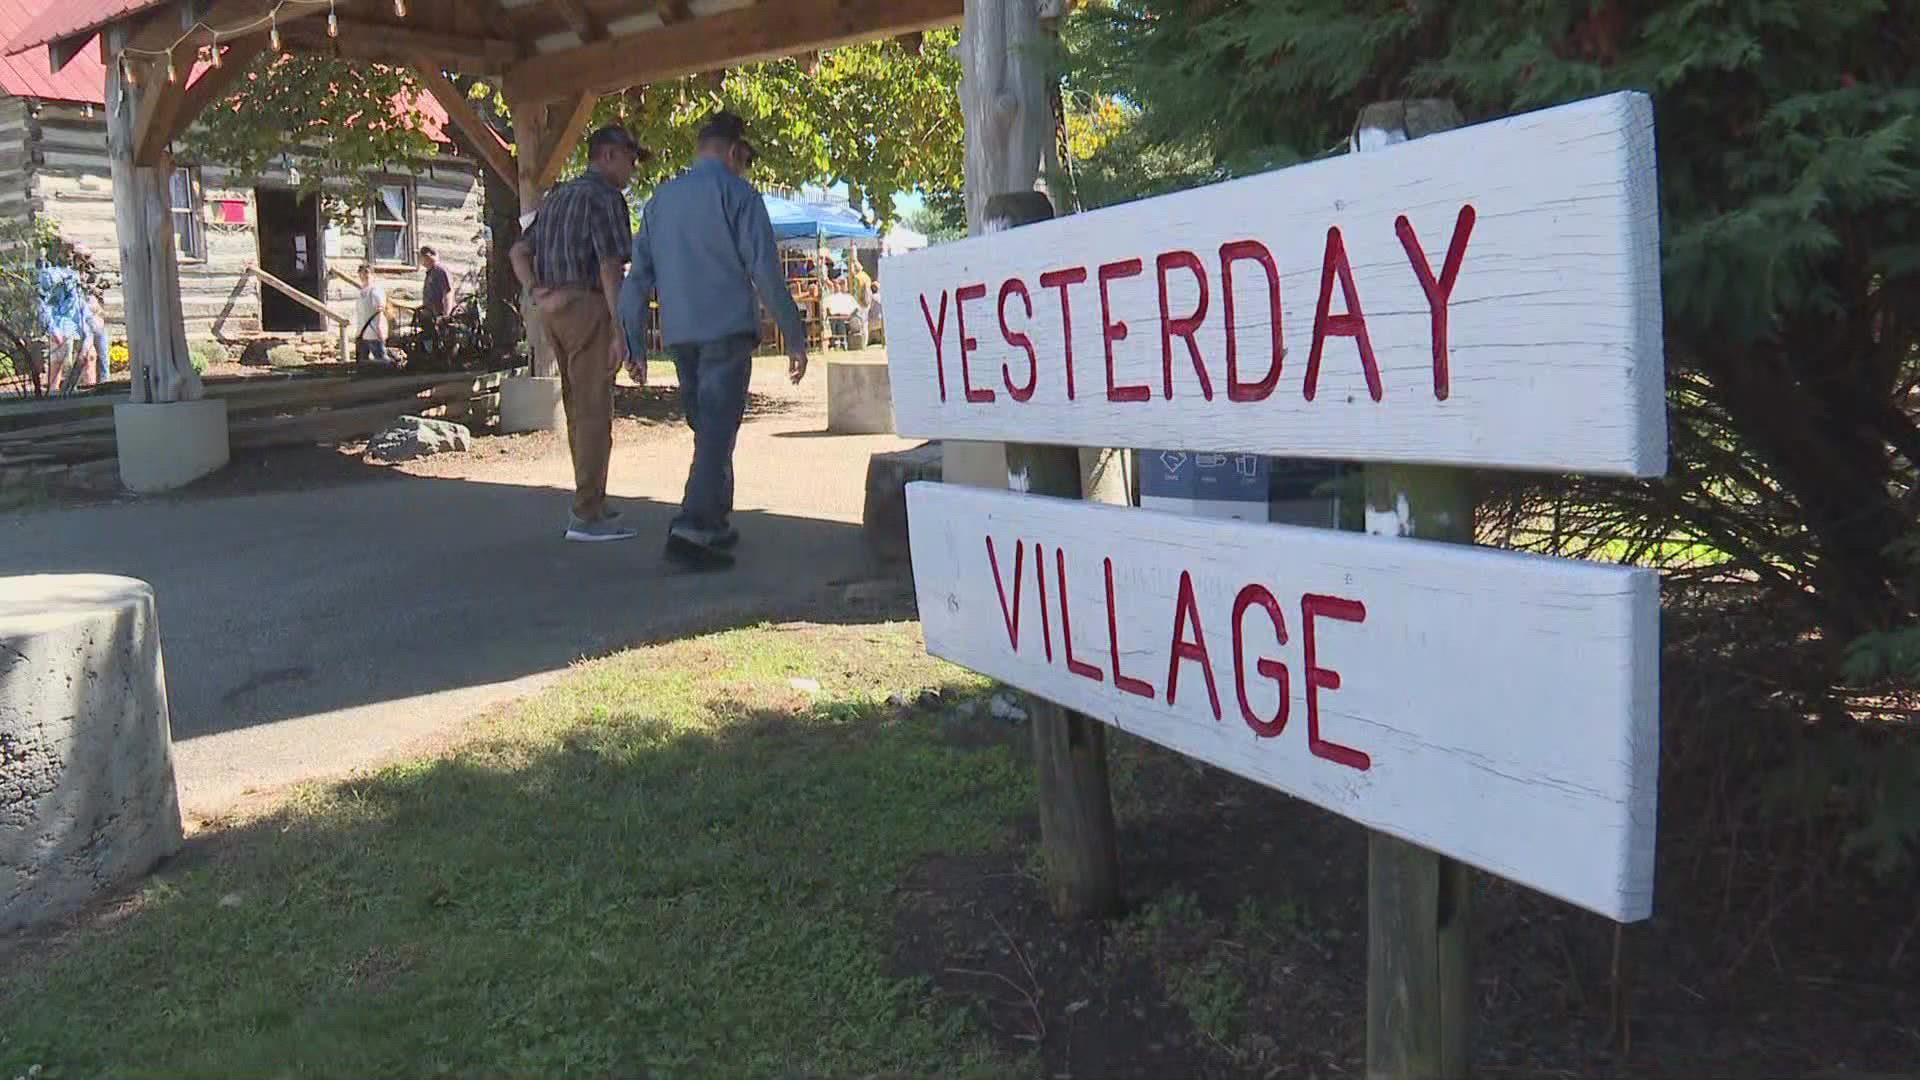 Yesterday Village features blacksmiths, wood workers and chainsaw carving.